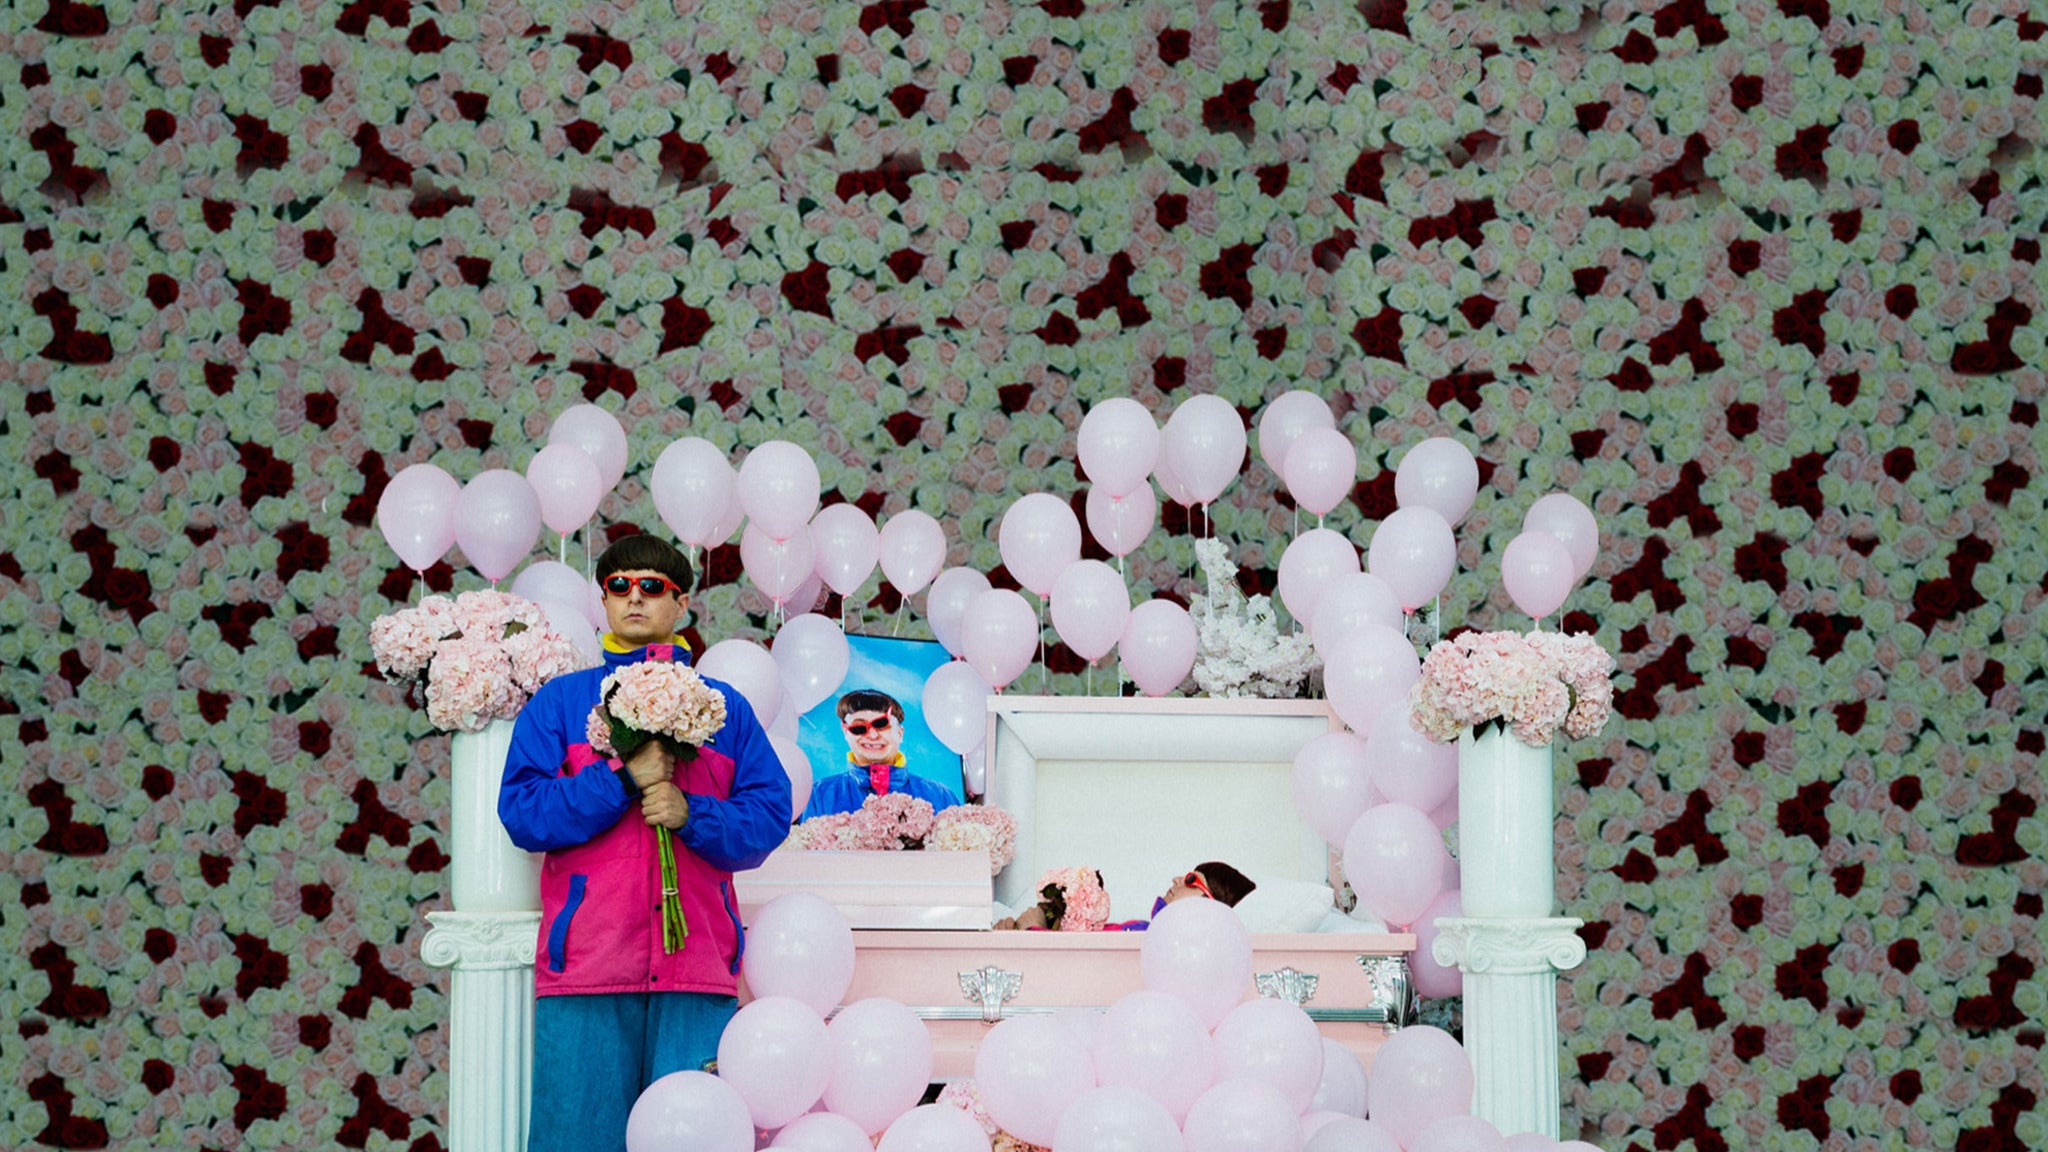 Oliver Tree - Goodbye Farewell Tour in Indianapolis promo photo for Live Nation Mobile App presale offer code